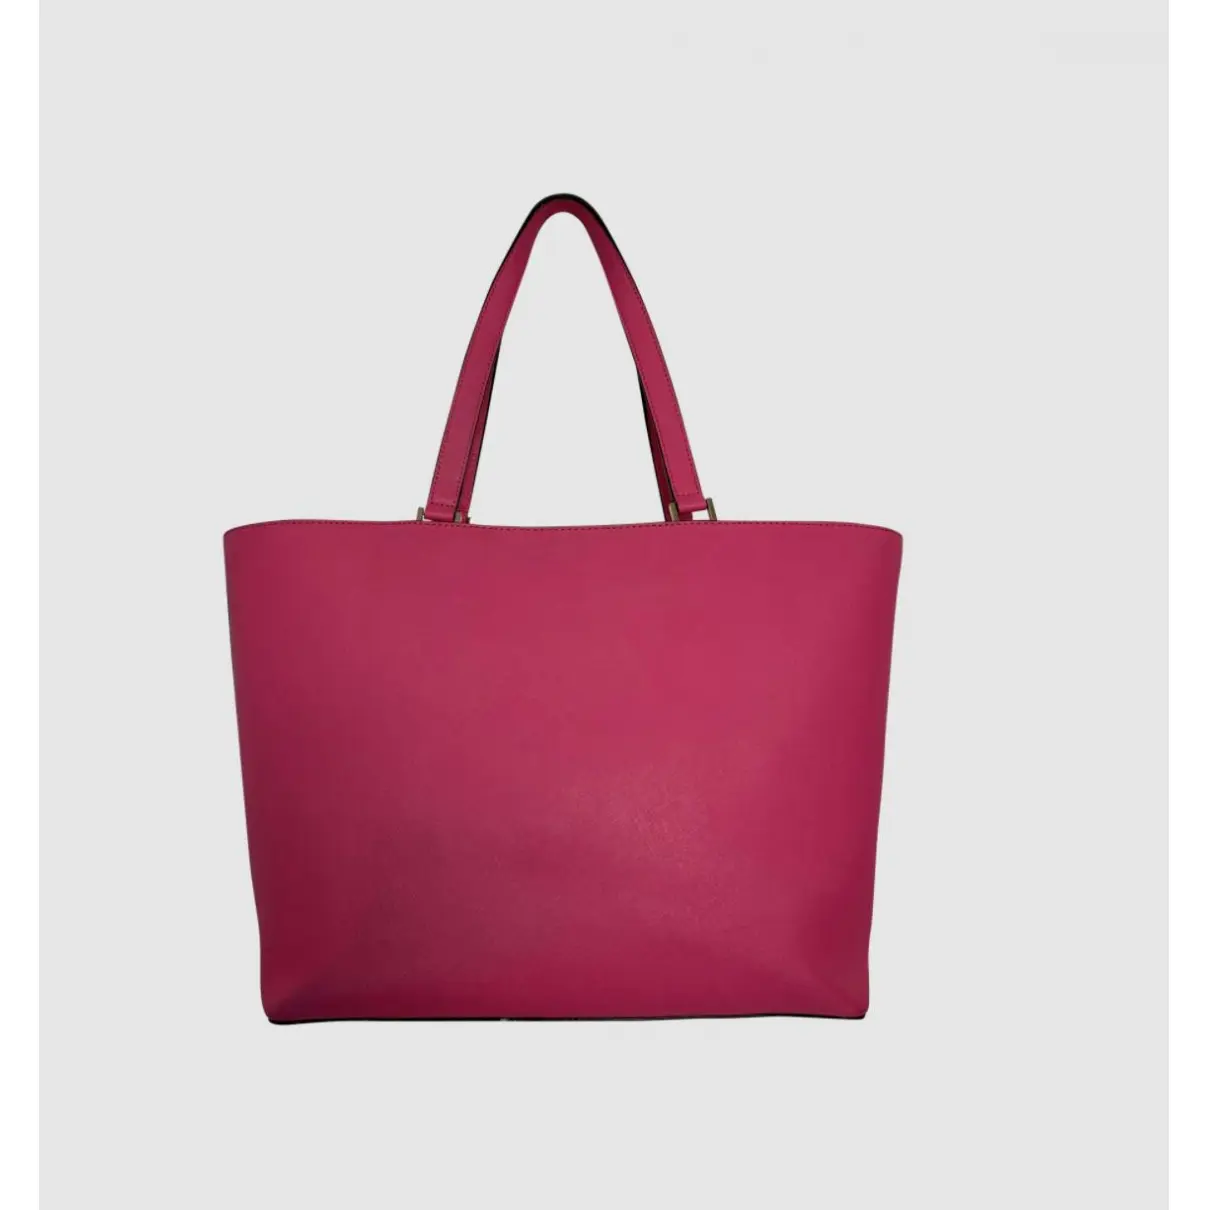 Buy Kate Spade Leather tote online